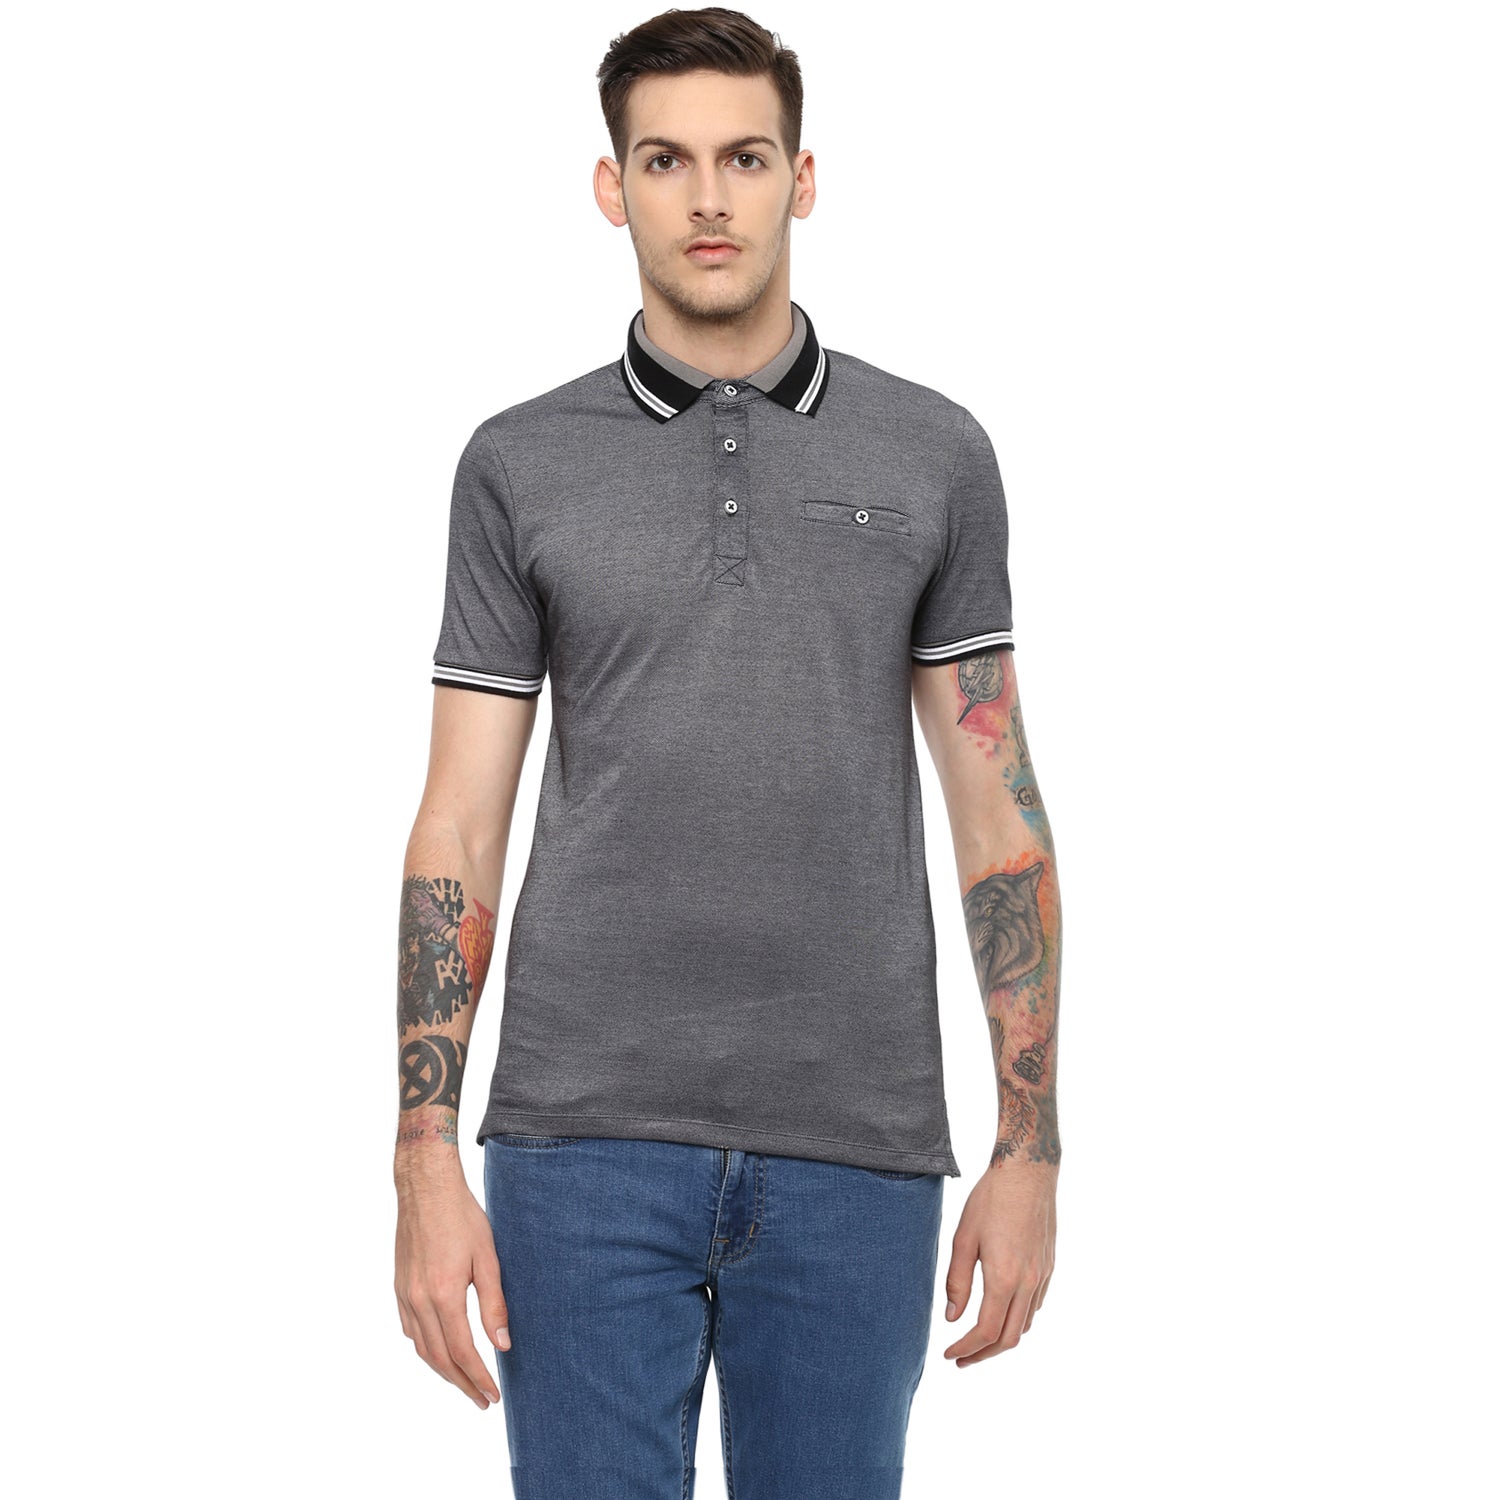 Grey Solid Regular Fit Polo T-Shirt (LEAGERAY)